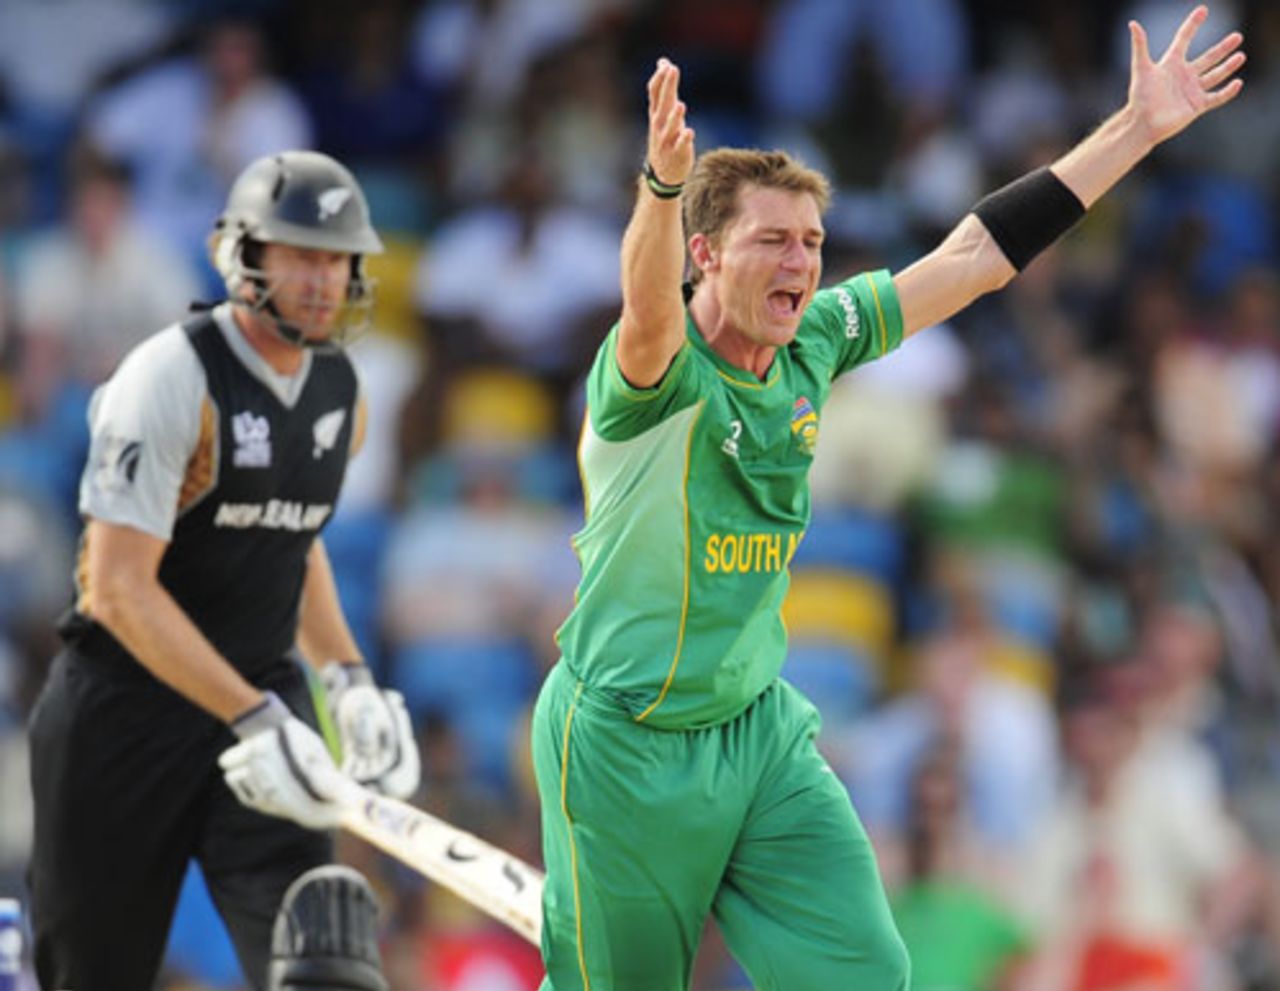 Dale Steyn appeals successfully to dismiss Jacob Oram, New Zealand v South Africa, Group E, Bridgetown, May 6, 2010

